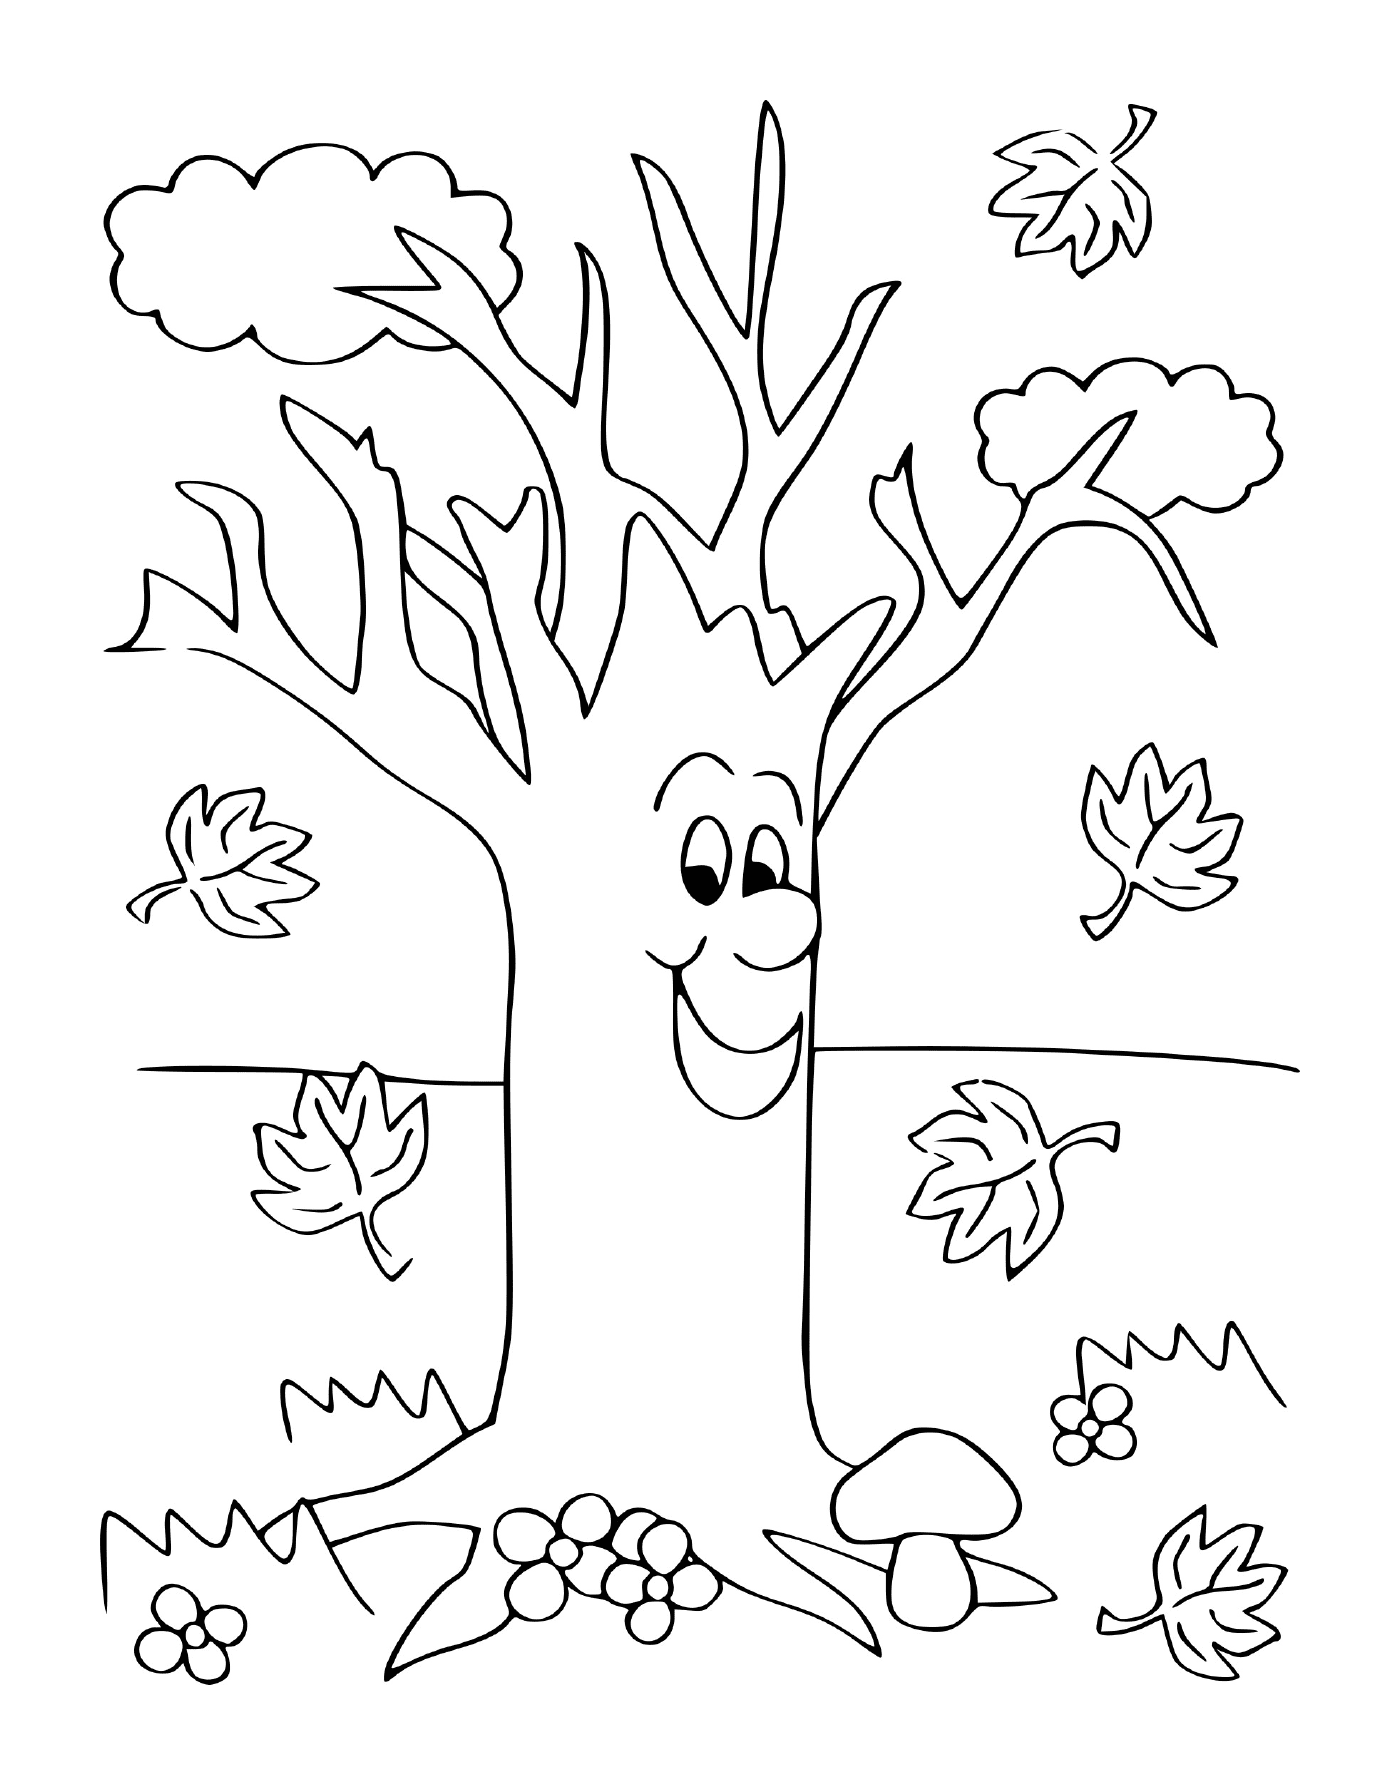  A tree with leaves 